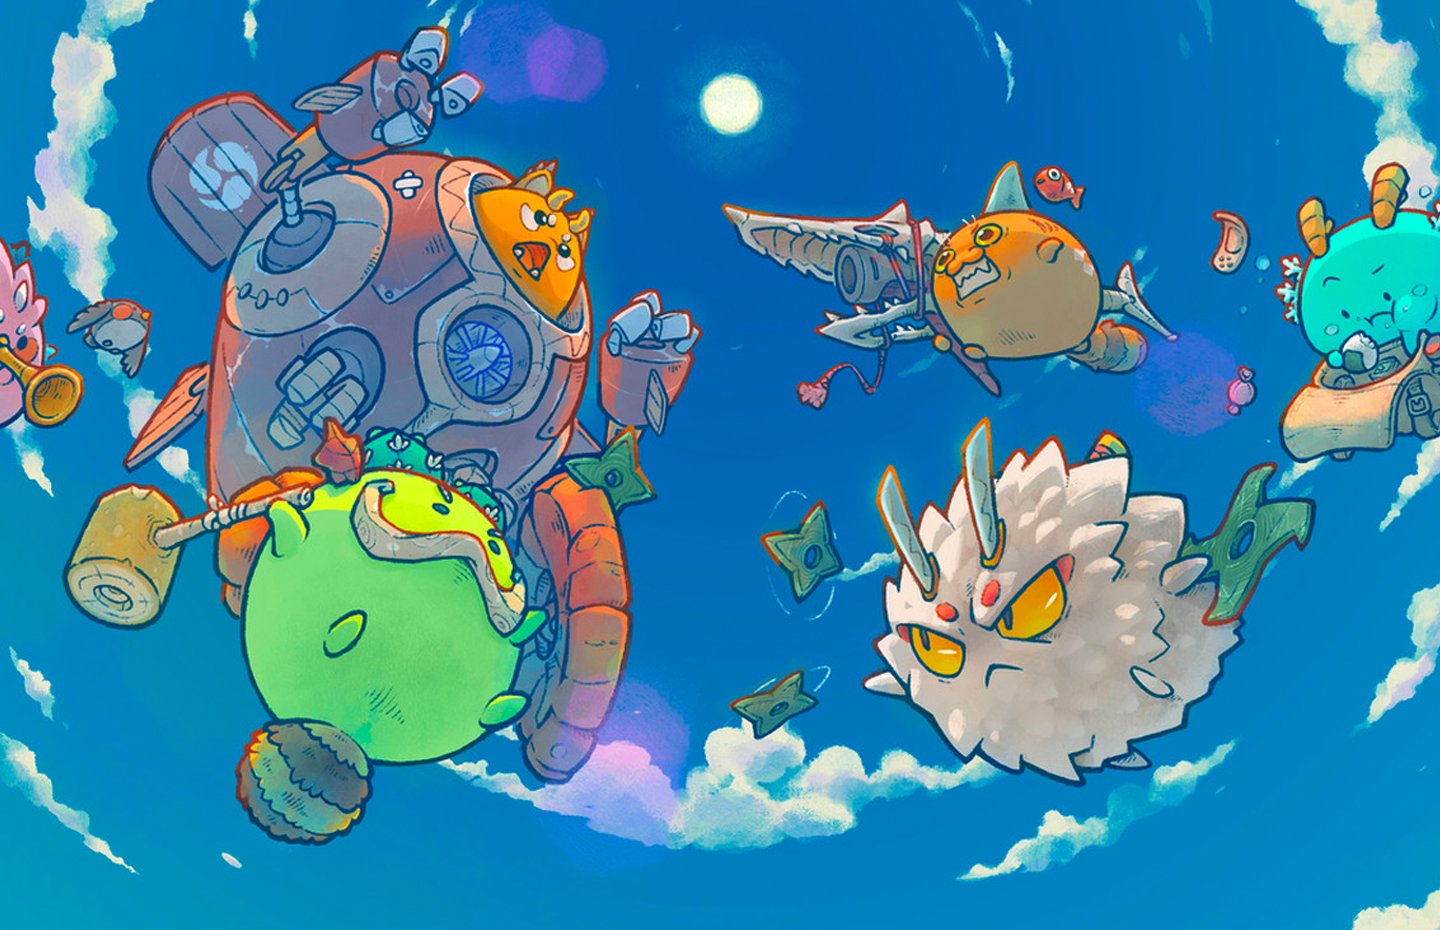 background image of Axie Infinity